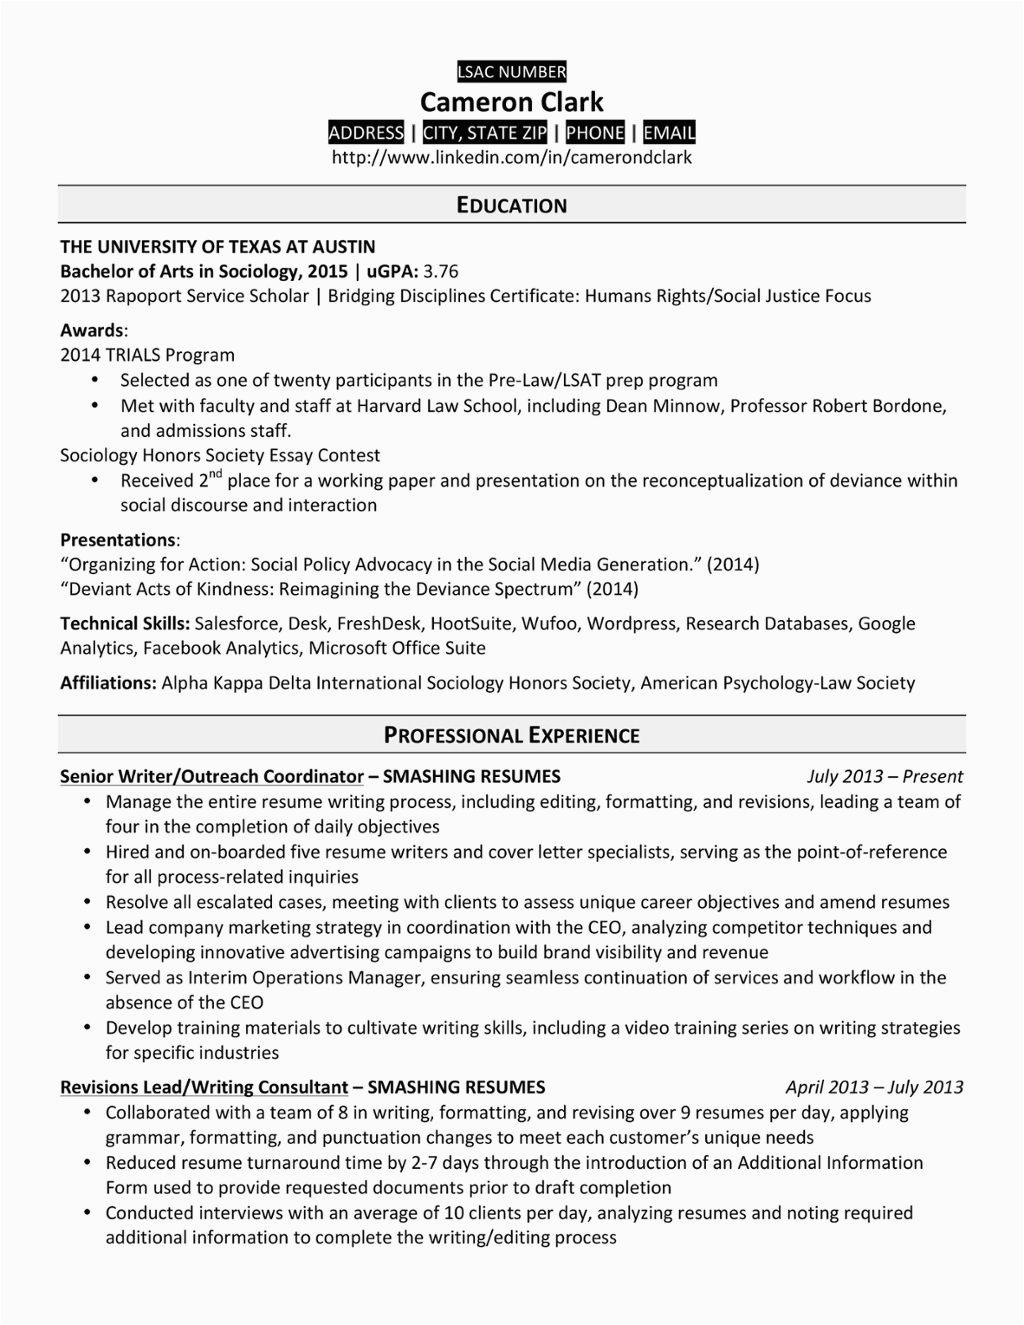 Sample Resume Recent Law School Graduate This Resume Of A Successful Harvard Law School Applicant Highlights His